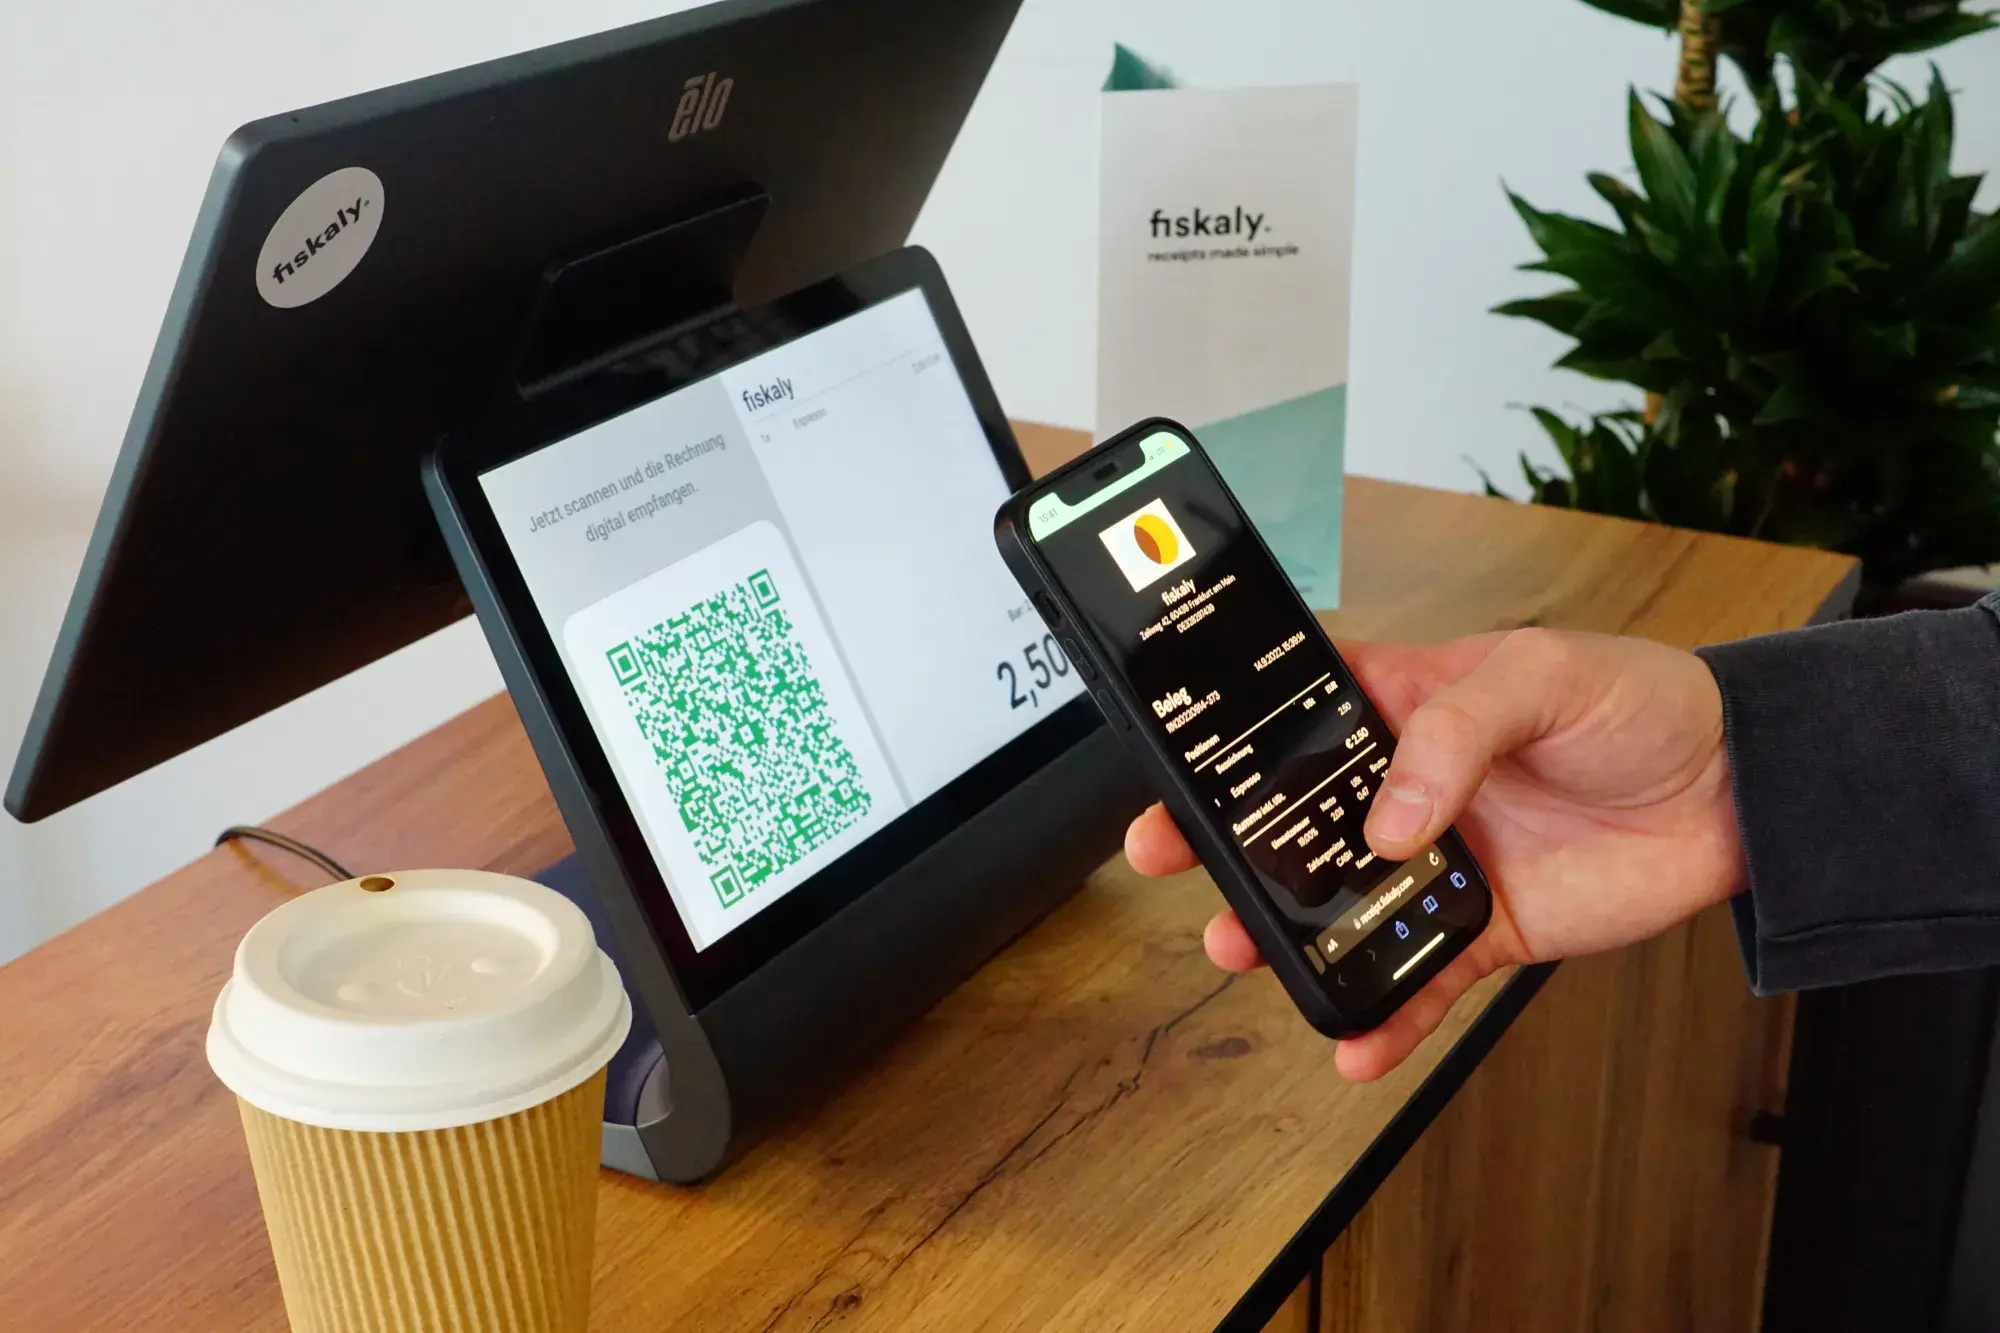 Digital receipts - The future is today